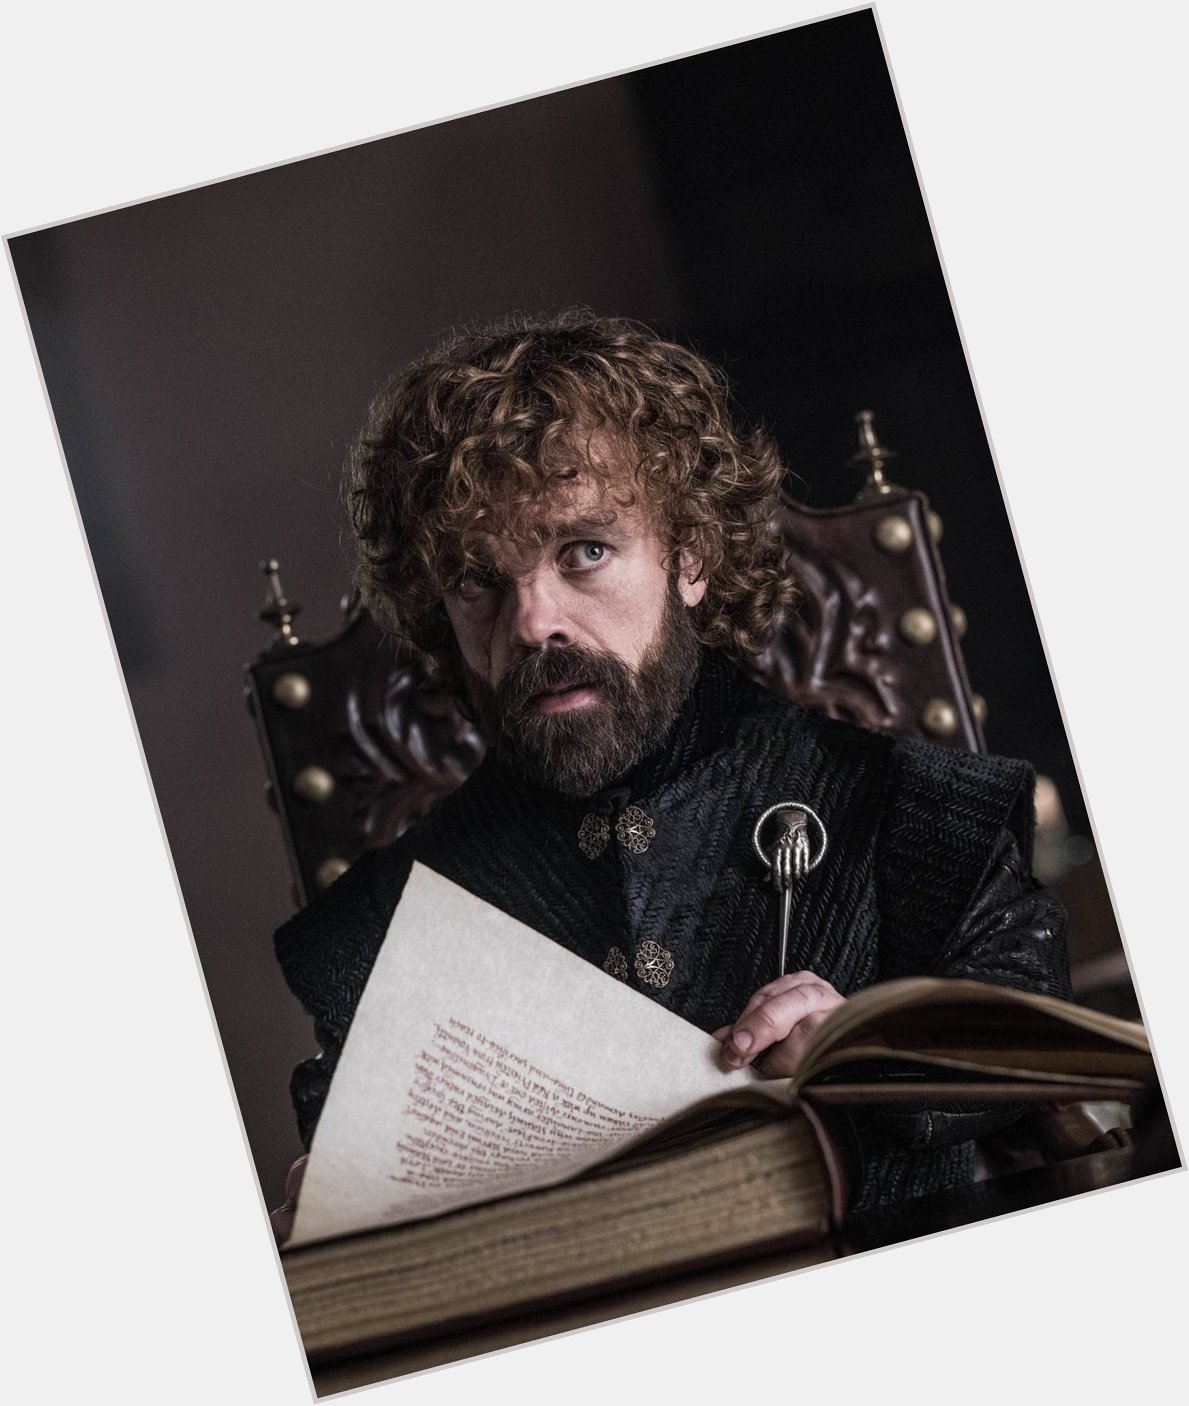 Happy birthday Peter Dinklage - Tyrion of House Lannister Massive respect to this amazing actor  